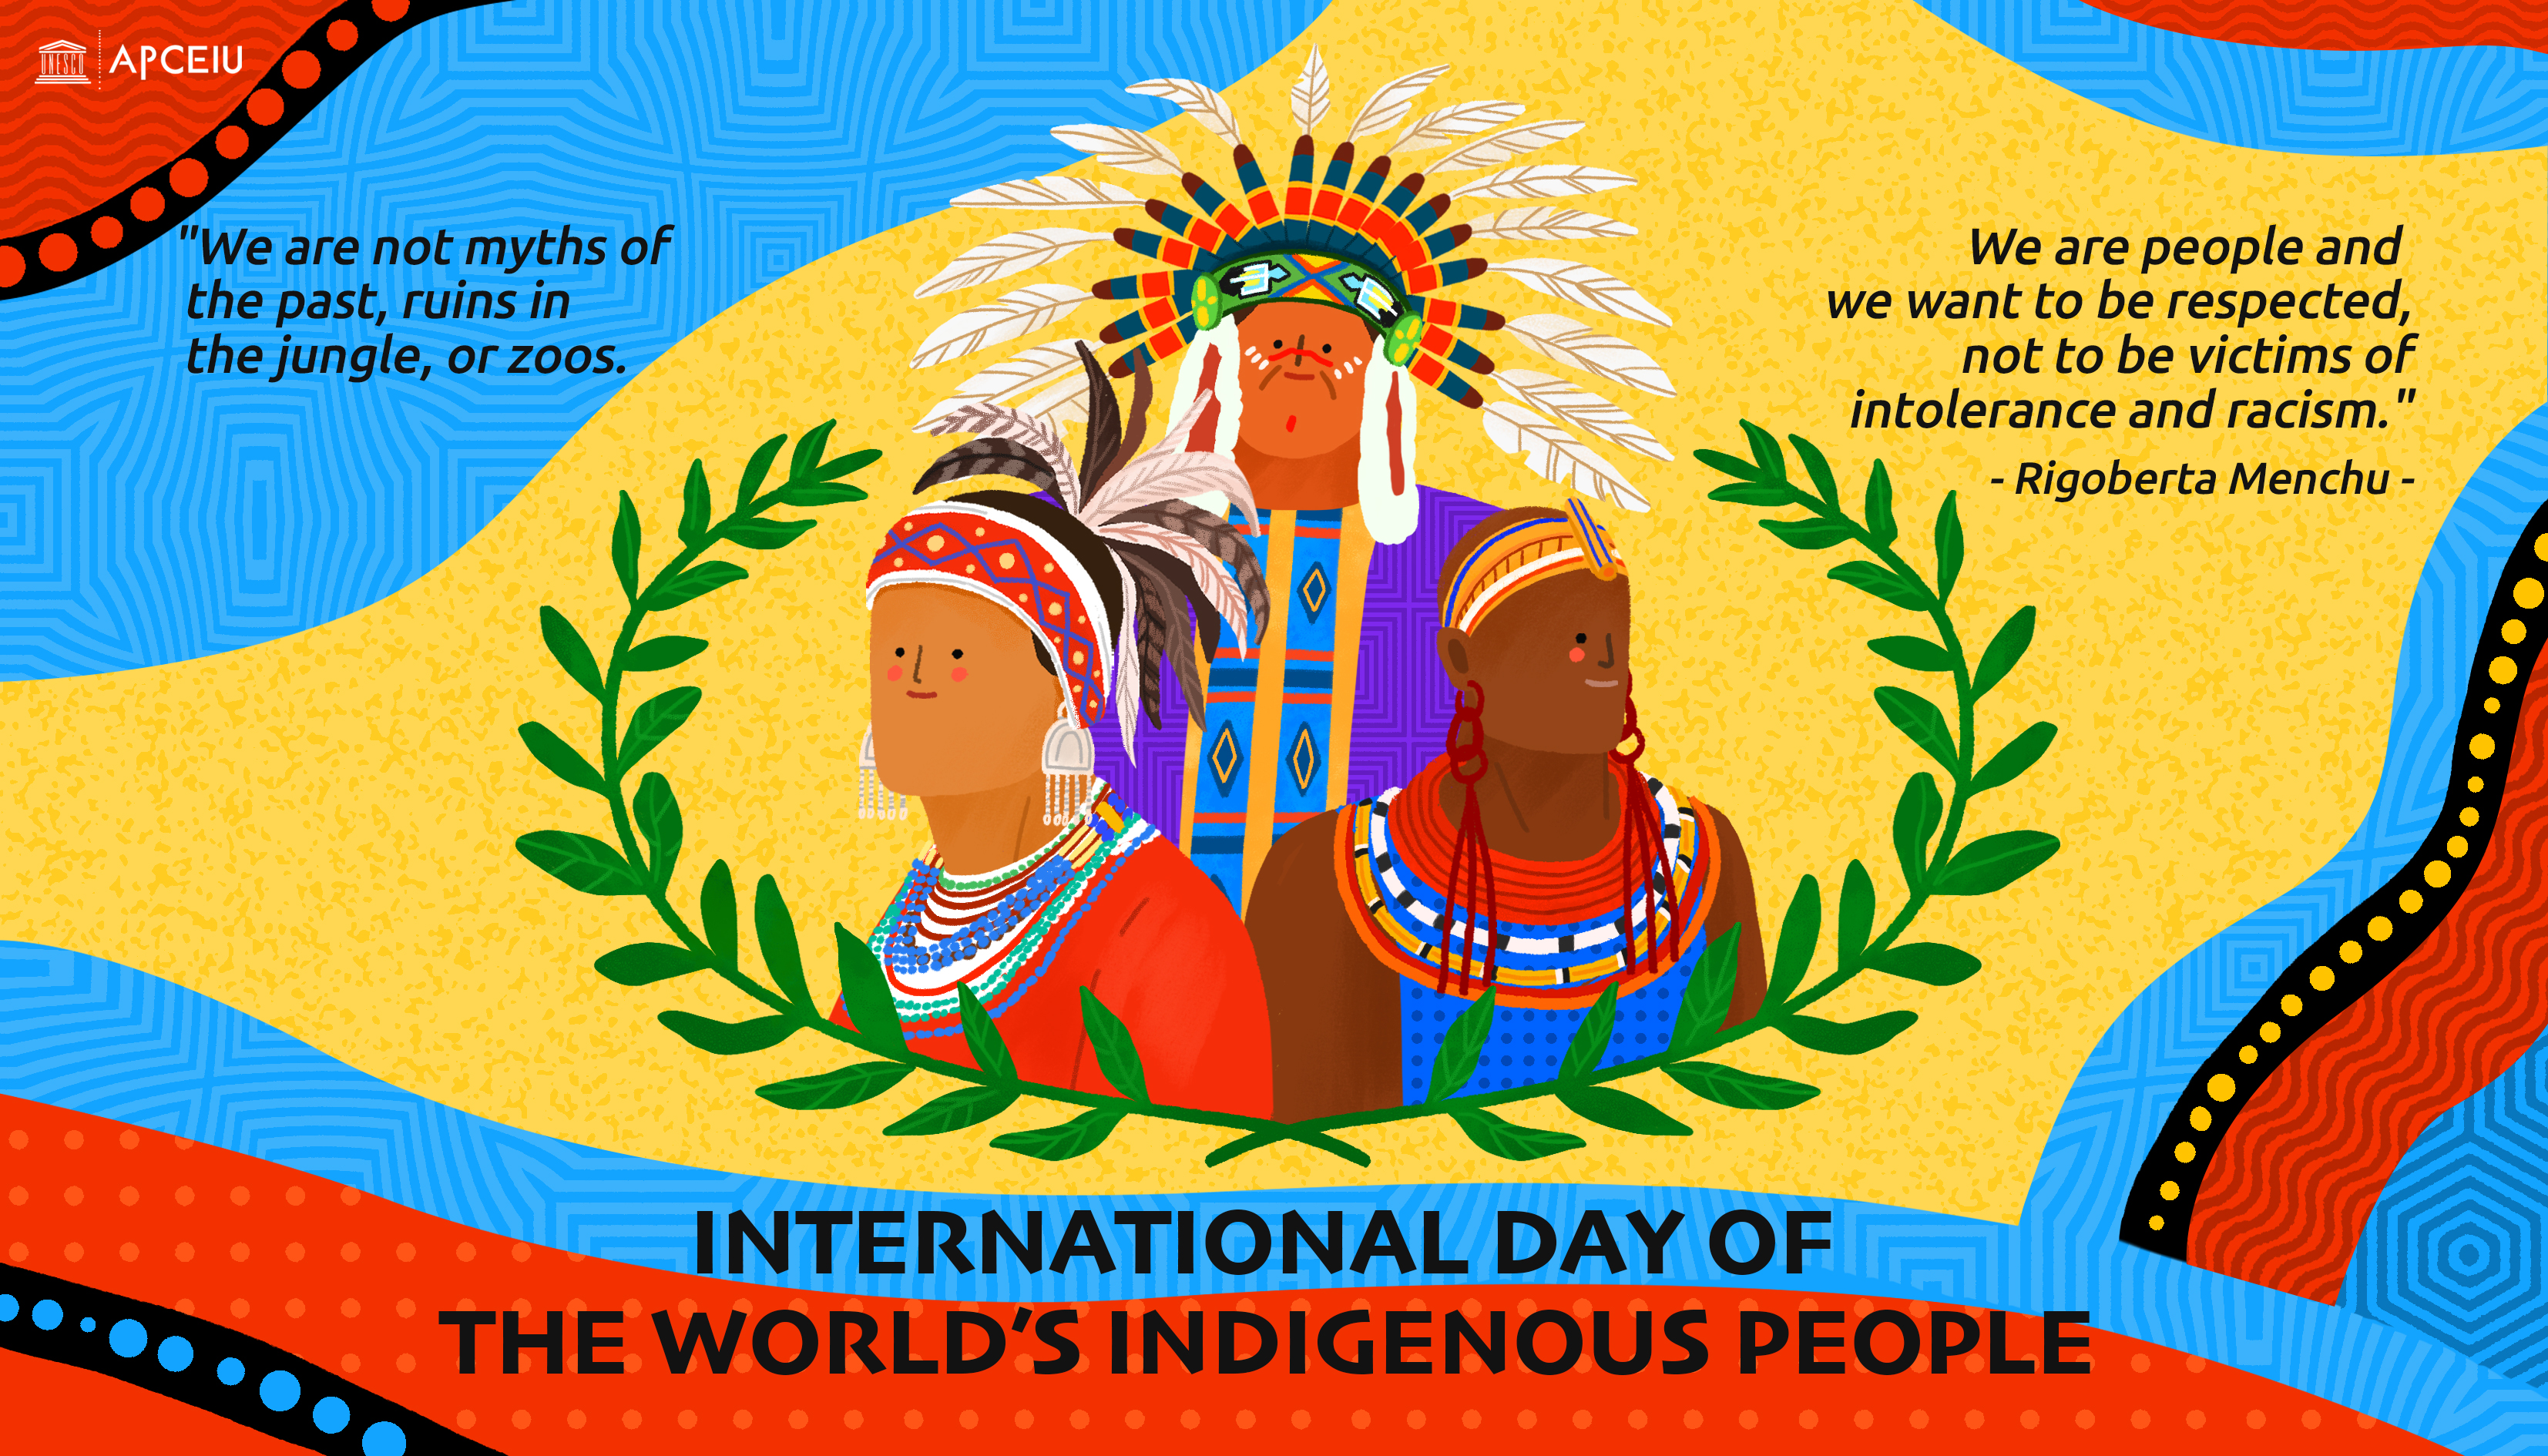 International Day of the World’s Indigenous Peoples Illustration.jpg